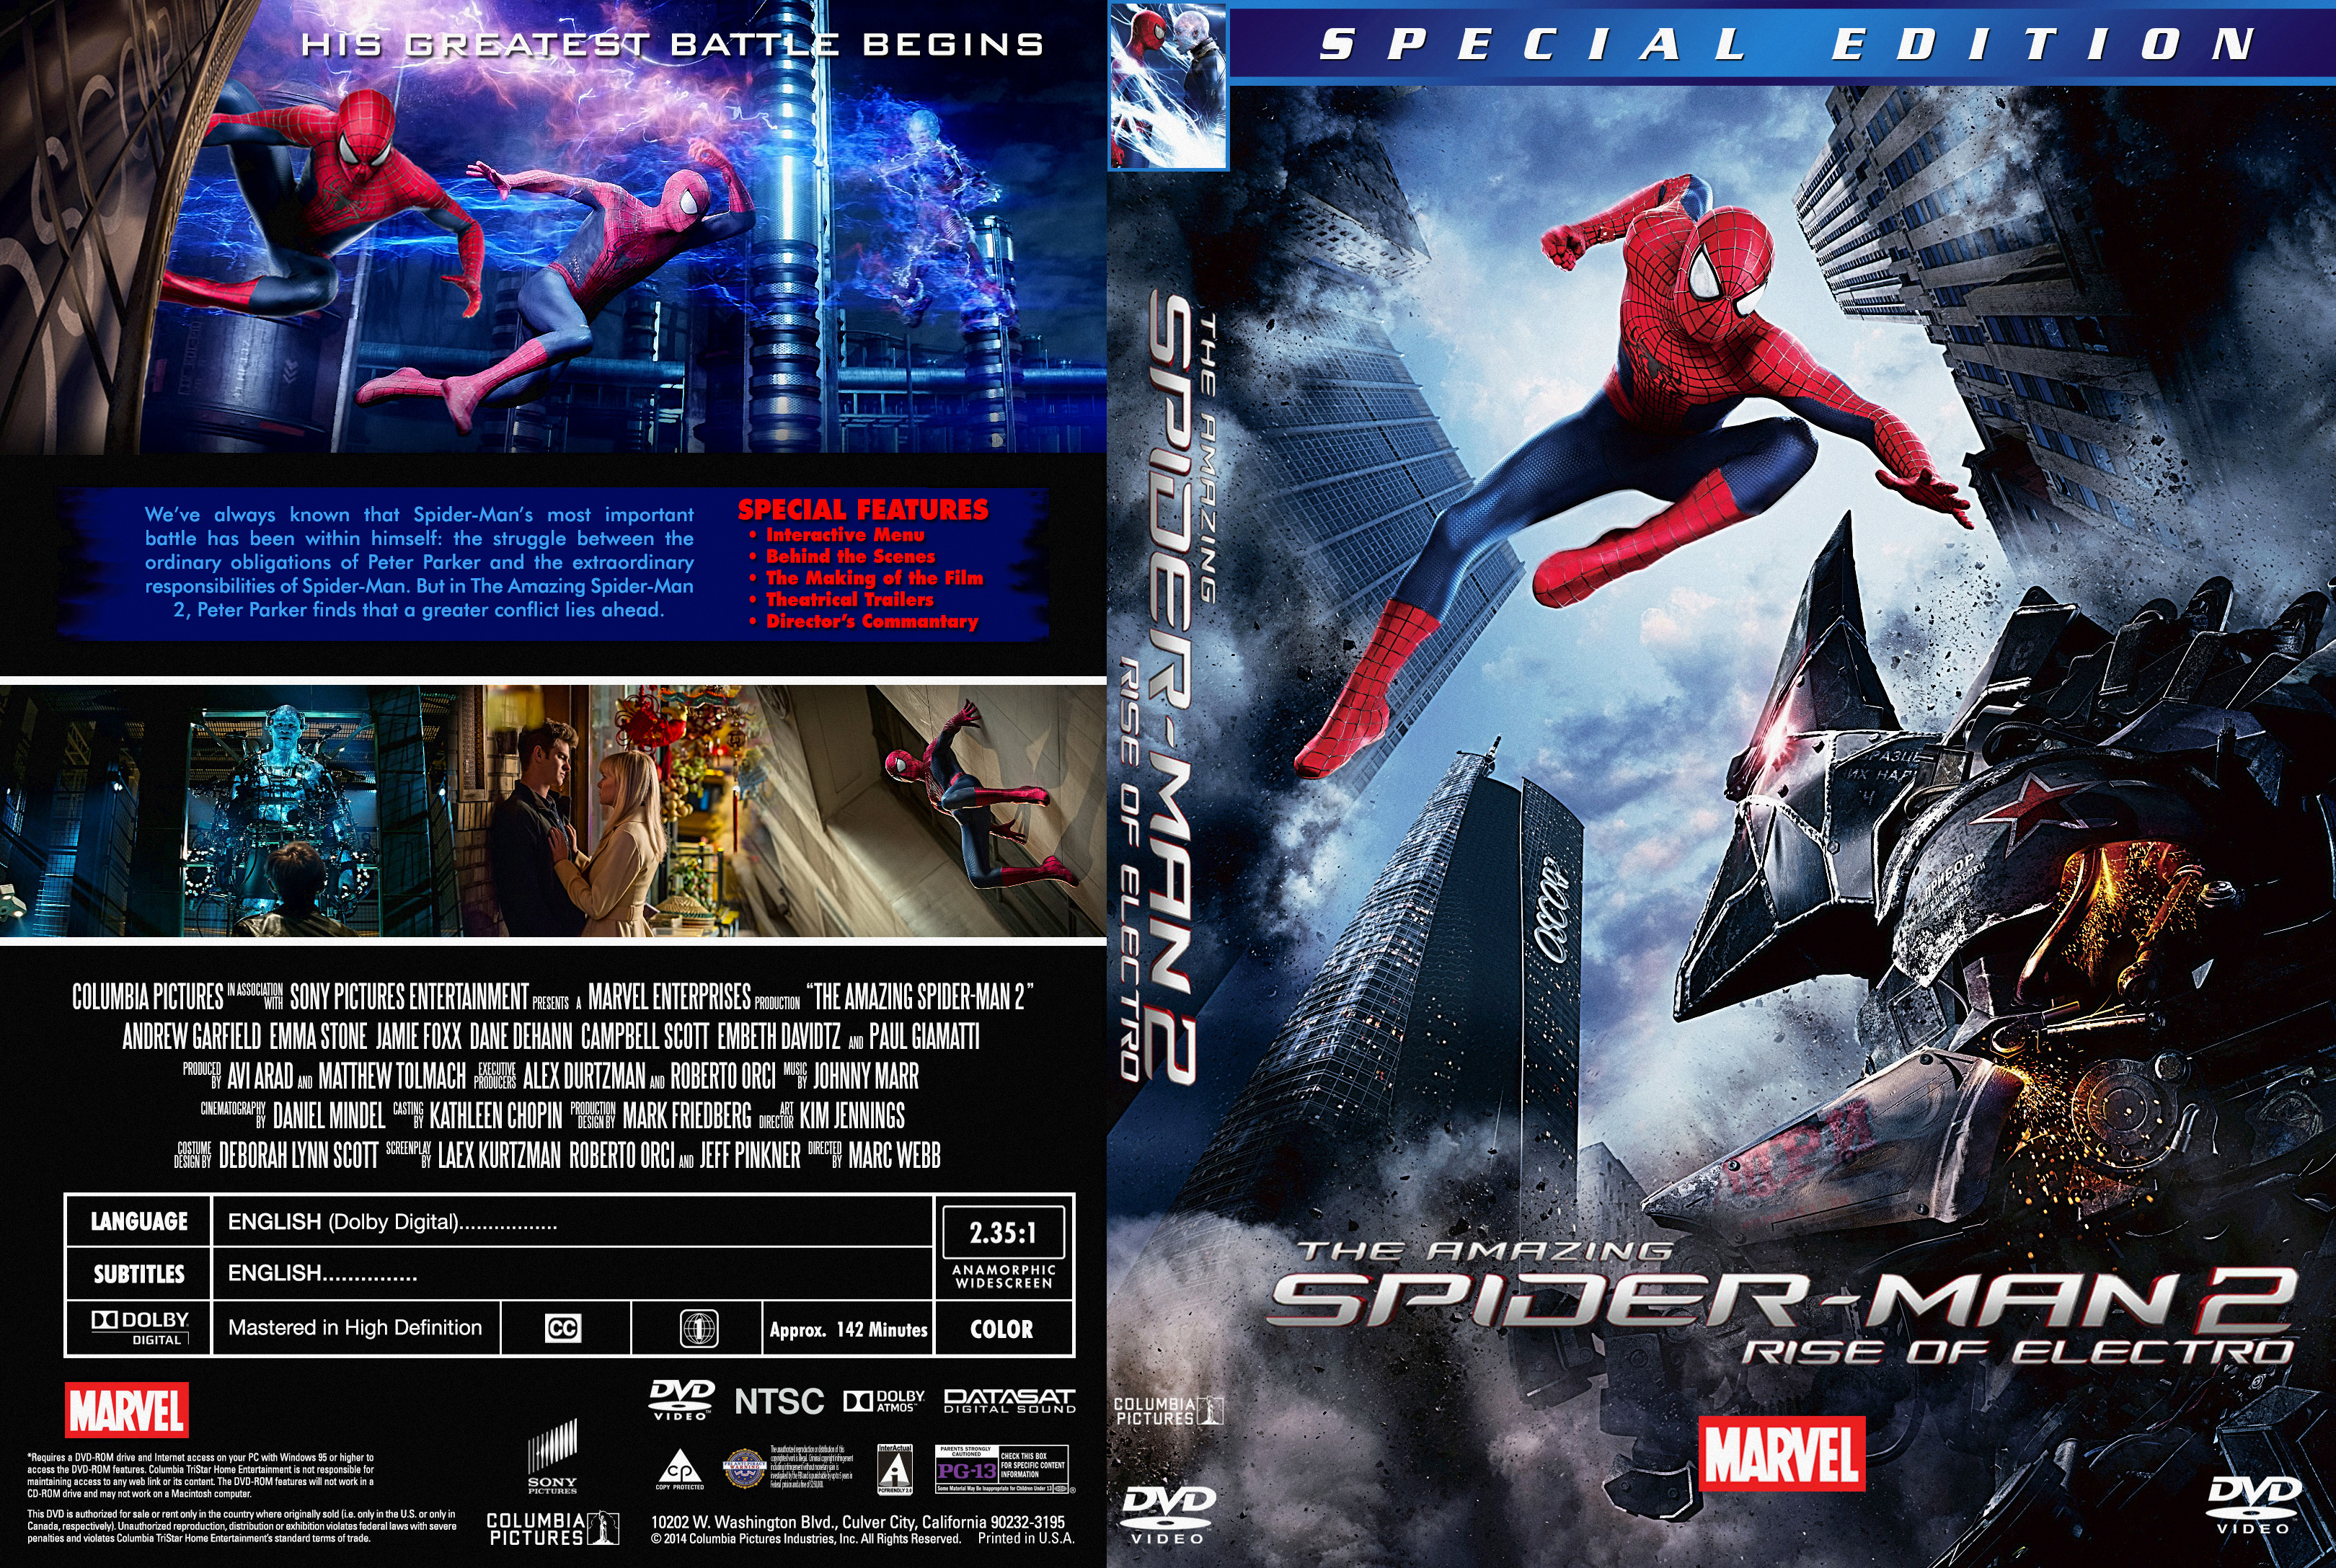 The Amazing Spider-man 2: Rise Of Electro Blu-ray Dvd Cover 